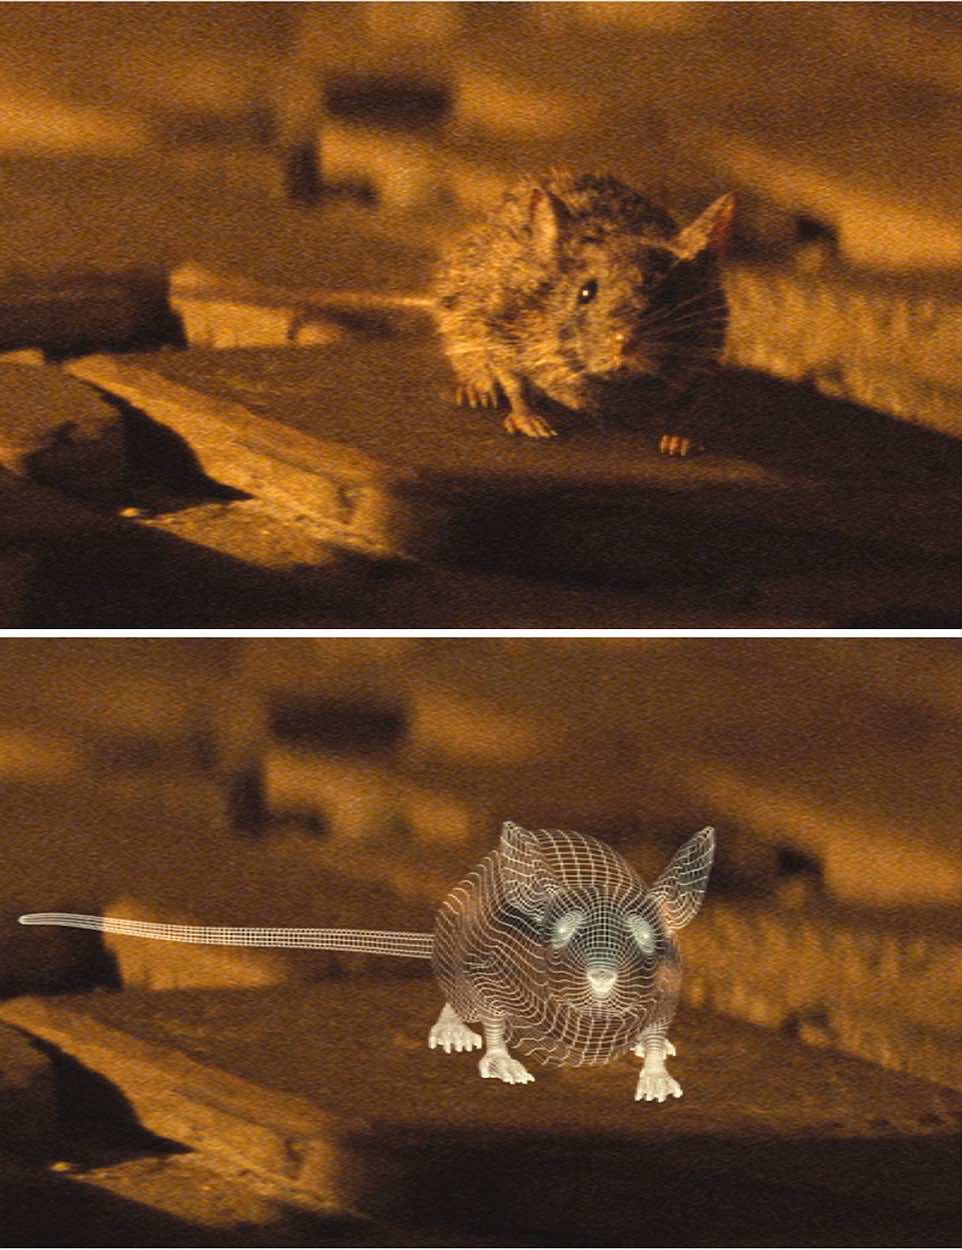 Spectre (2015) James Bond is led to his next clue in the hunt for Blofeld by a mouse which crawls along the floor to a secret room within an apartment 'Who sent you?' Bond asks the mouse - we see (BOTTOM) entirely the mouse was computer trickery